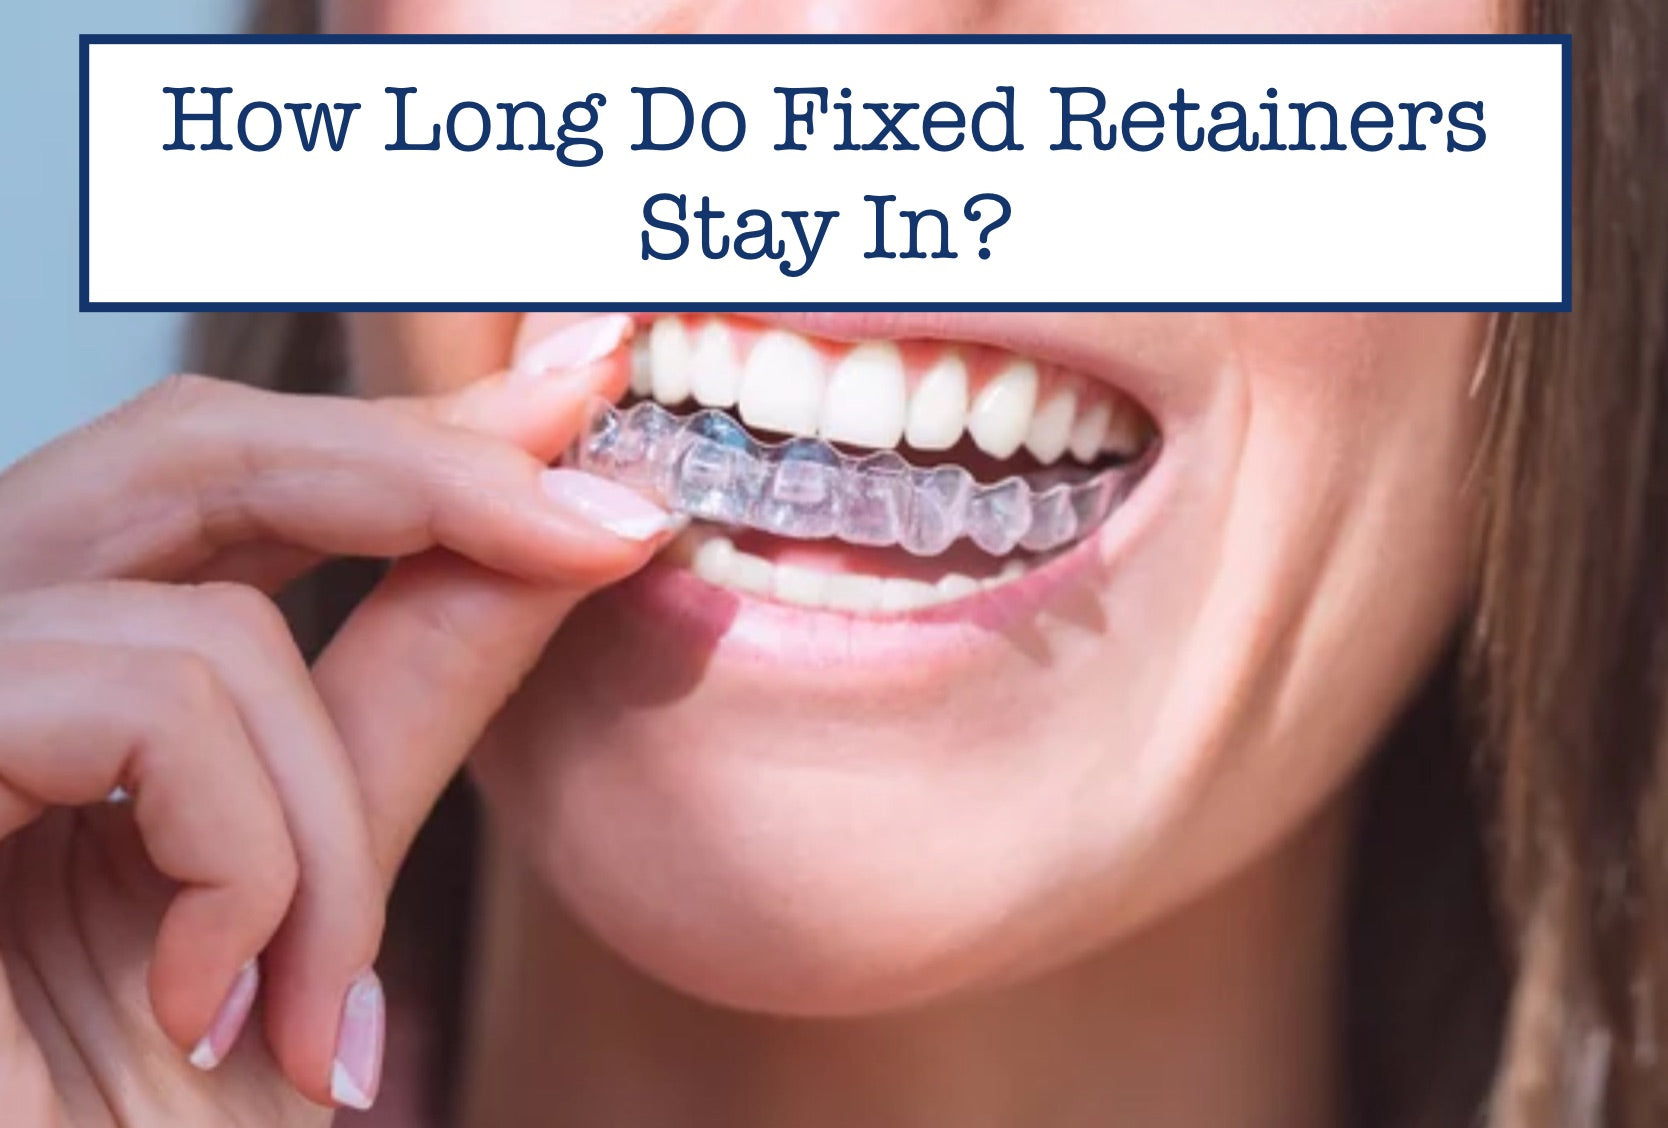 How Long Do Fixed Retainers Stay In?